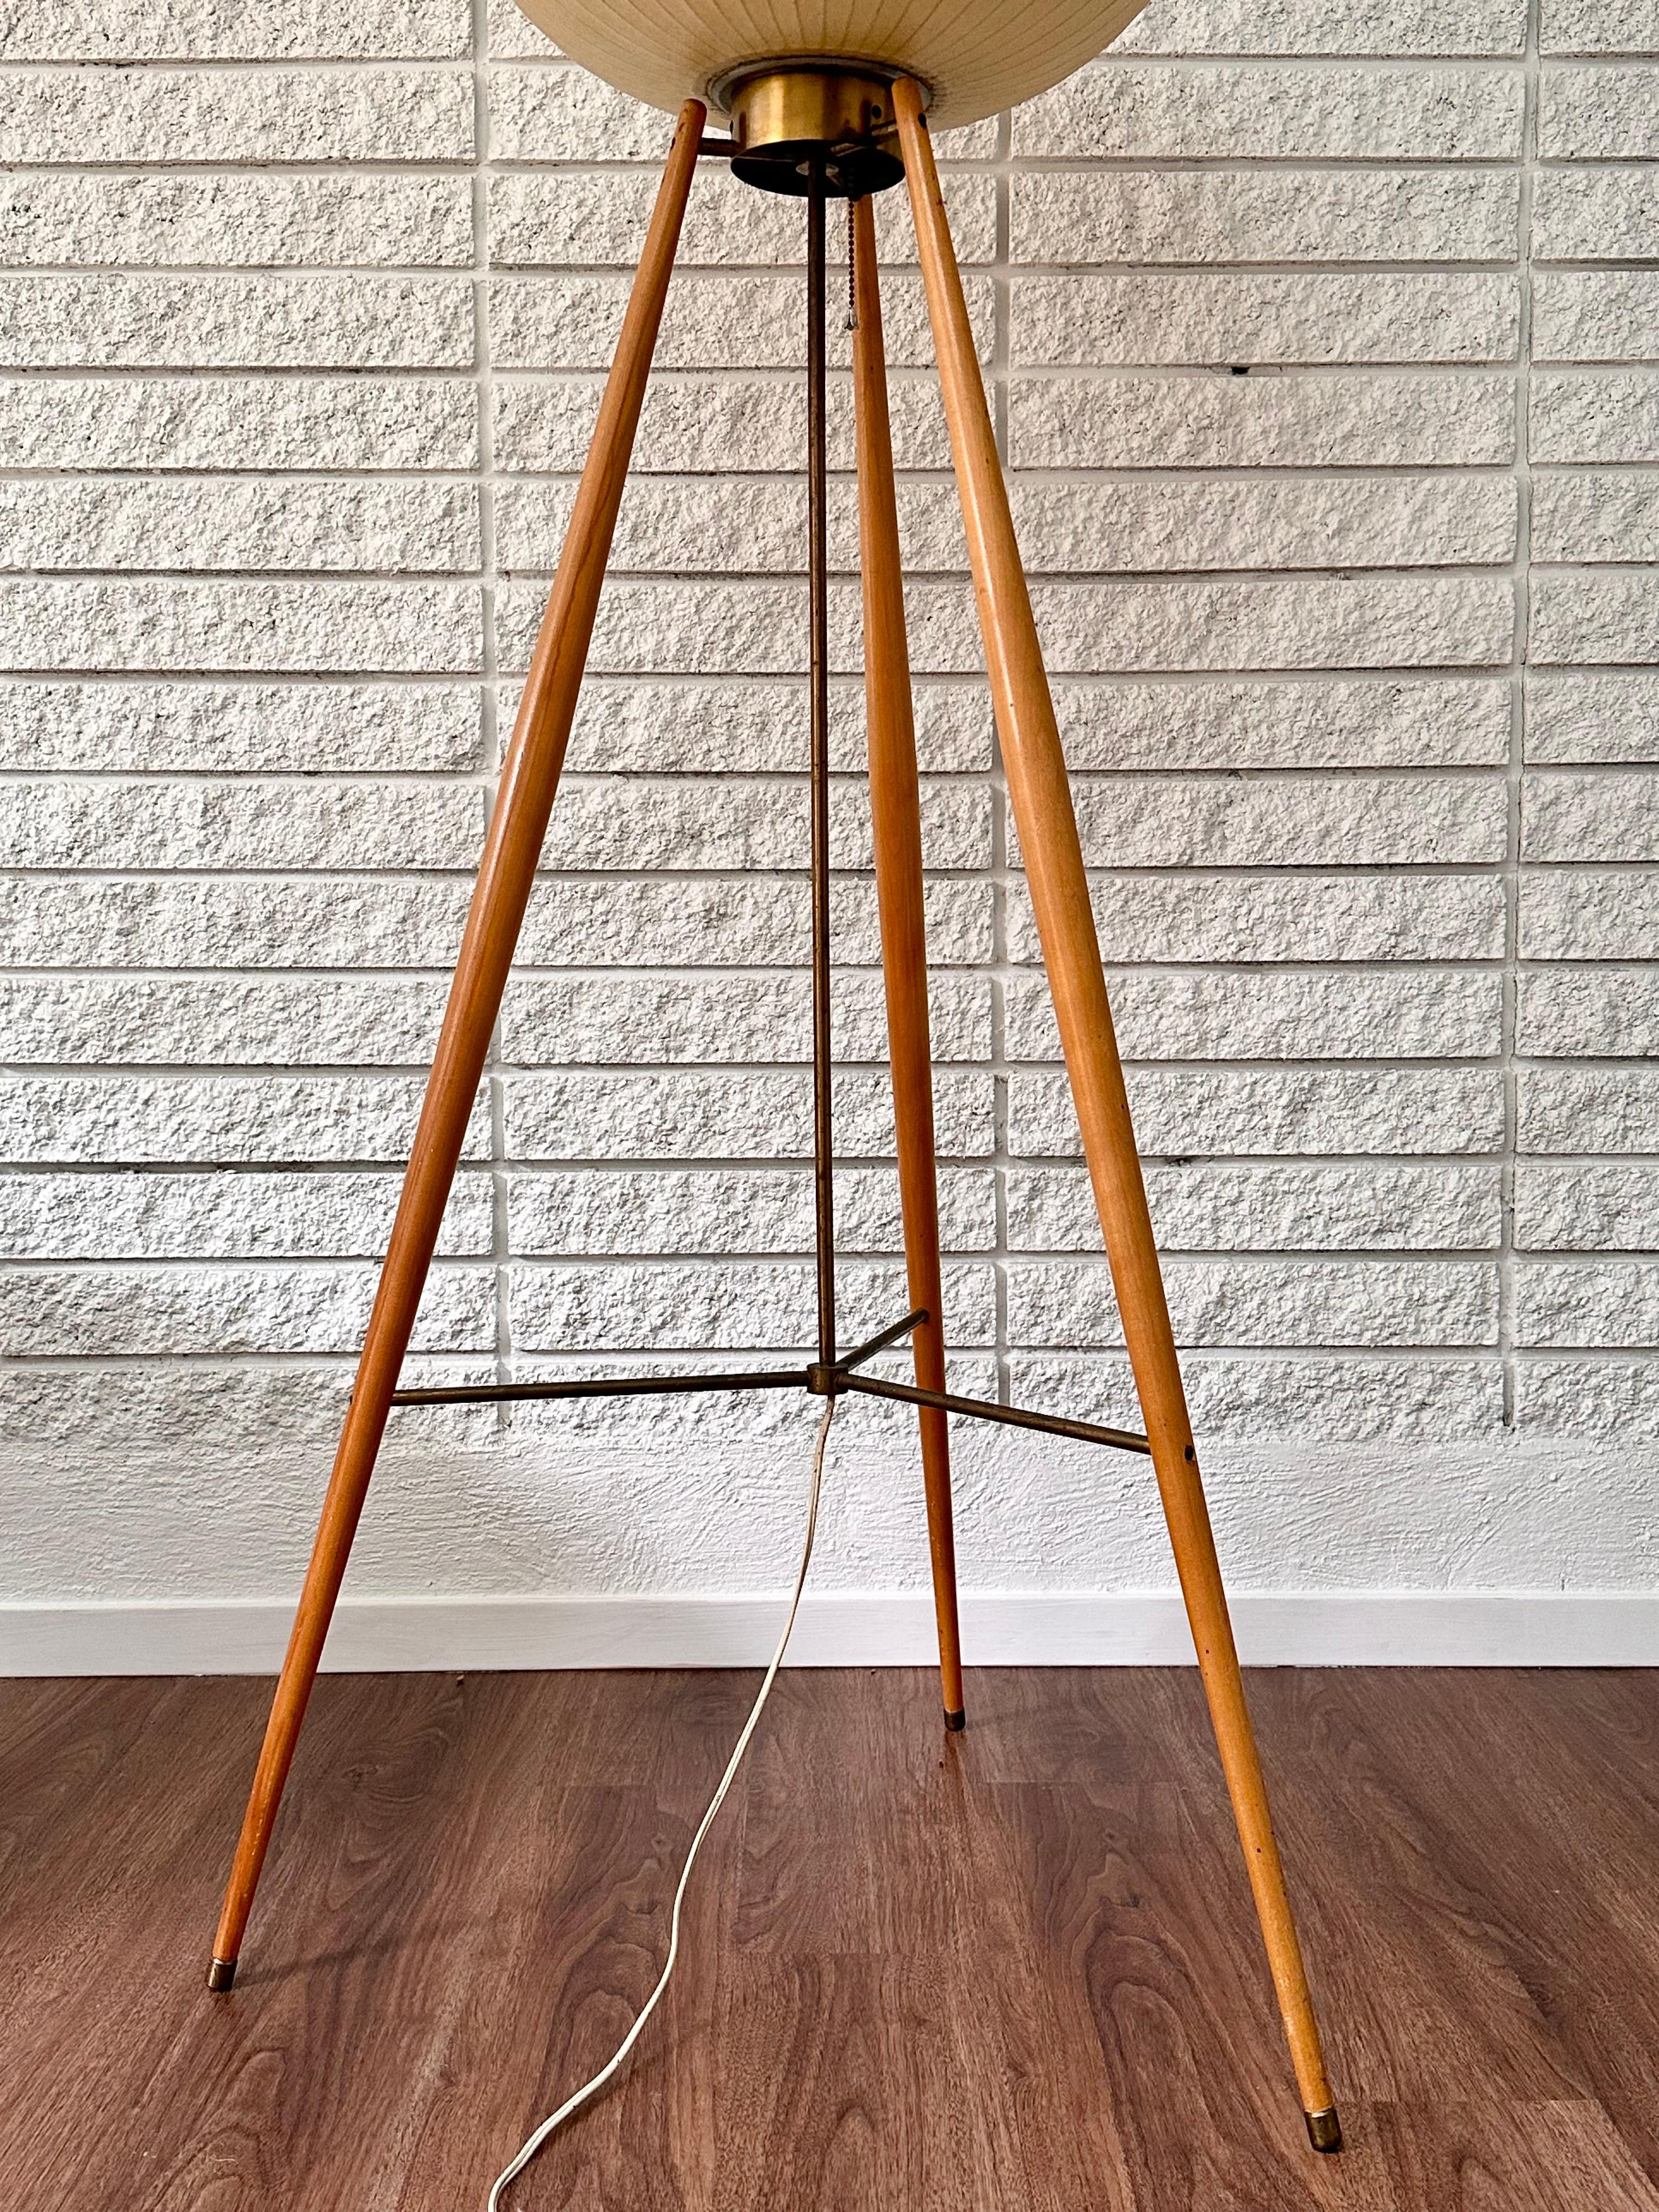 Brass Extremely Rare George Nelson Bubble Floor Lamp Original Birch Tripod Base 1950s For Sale